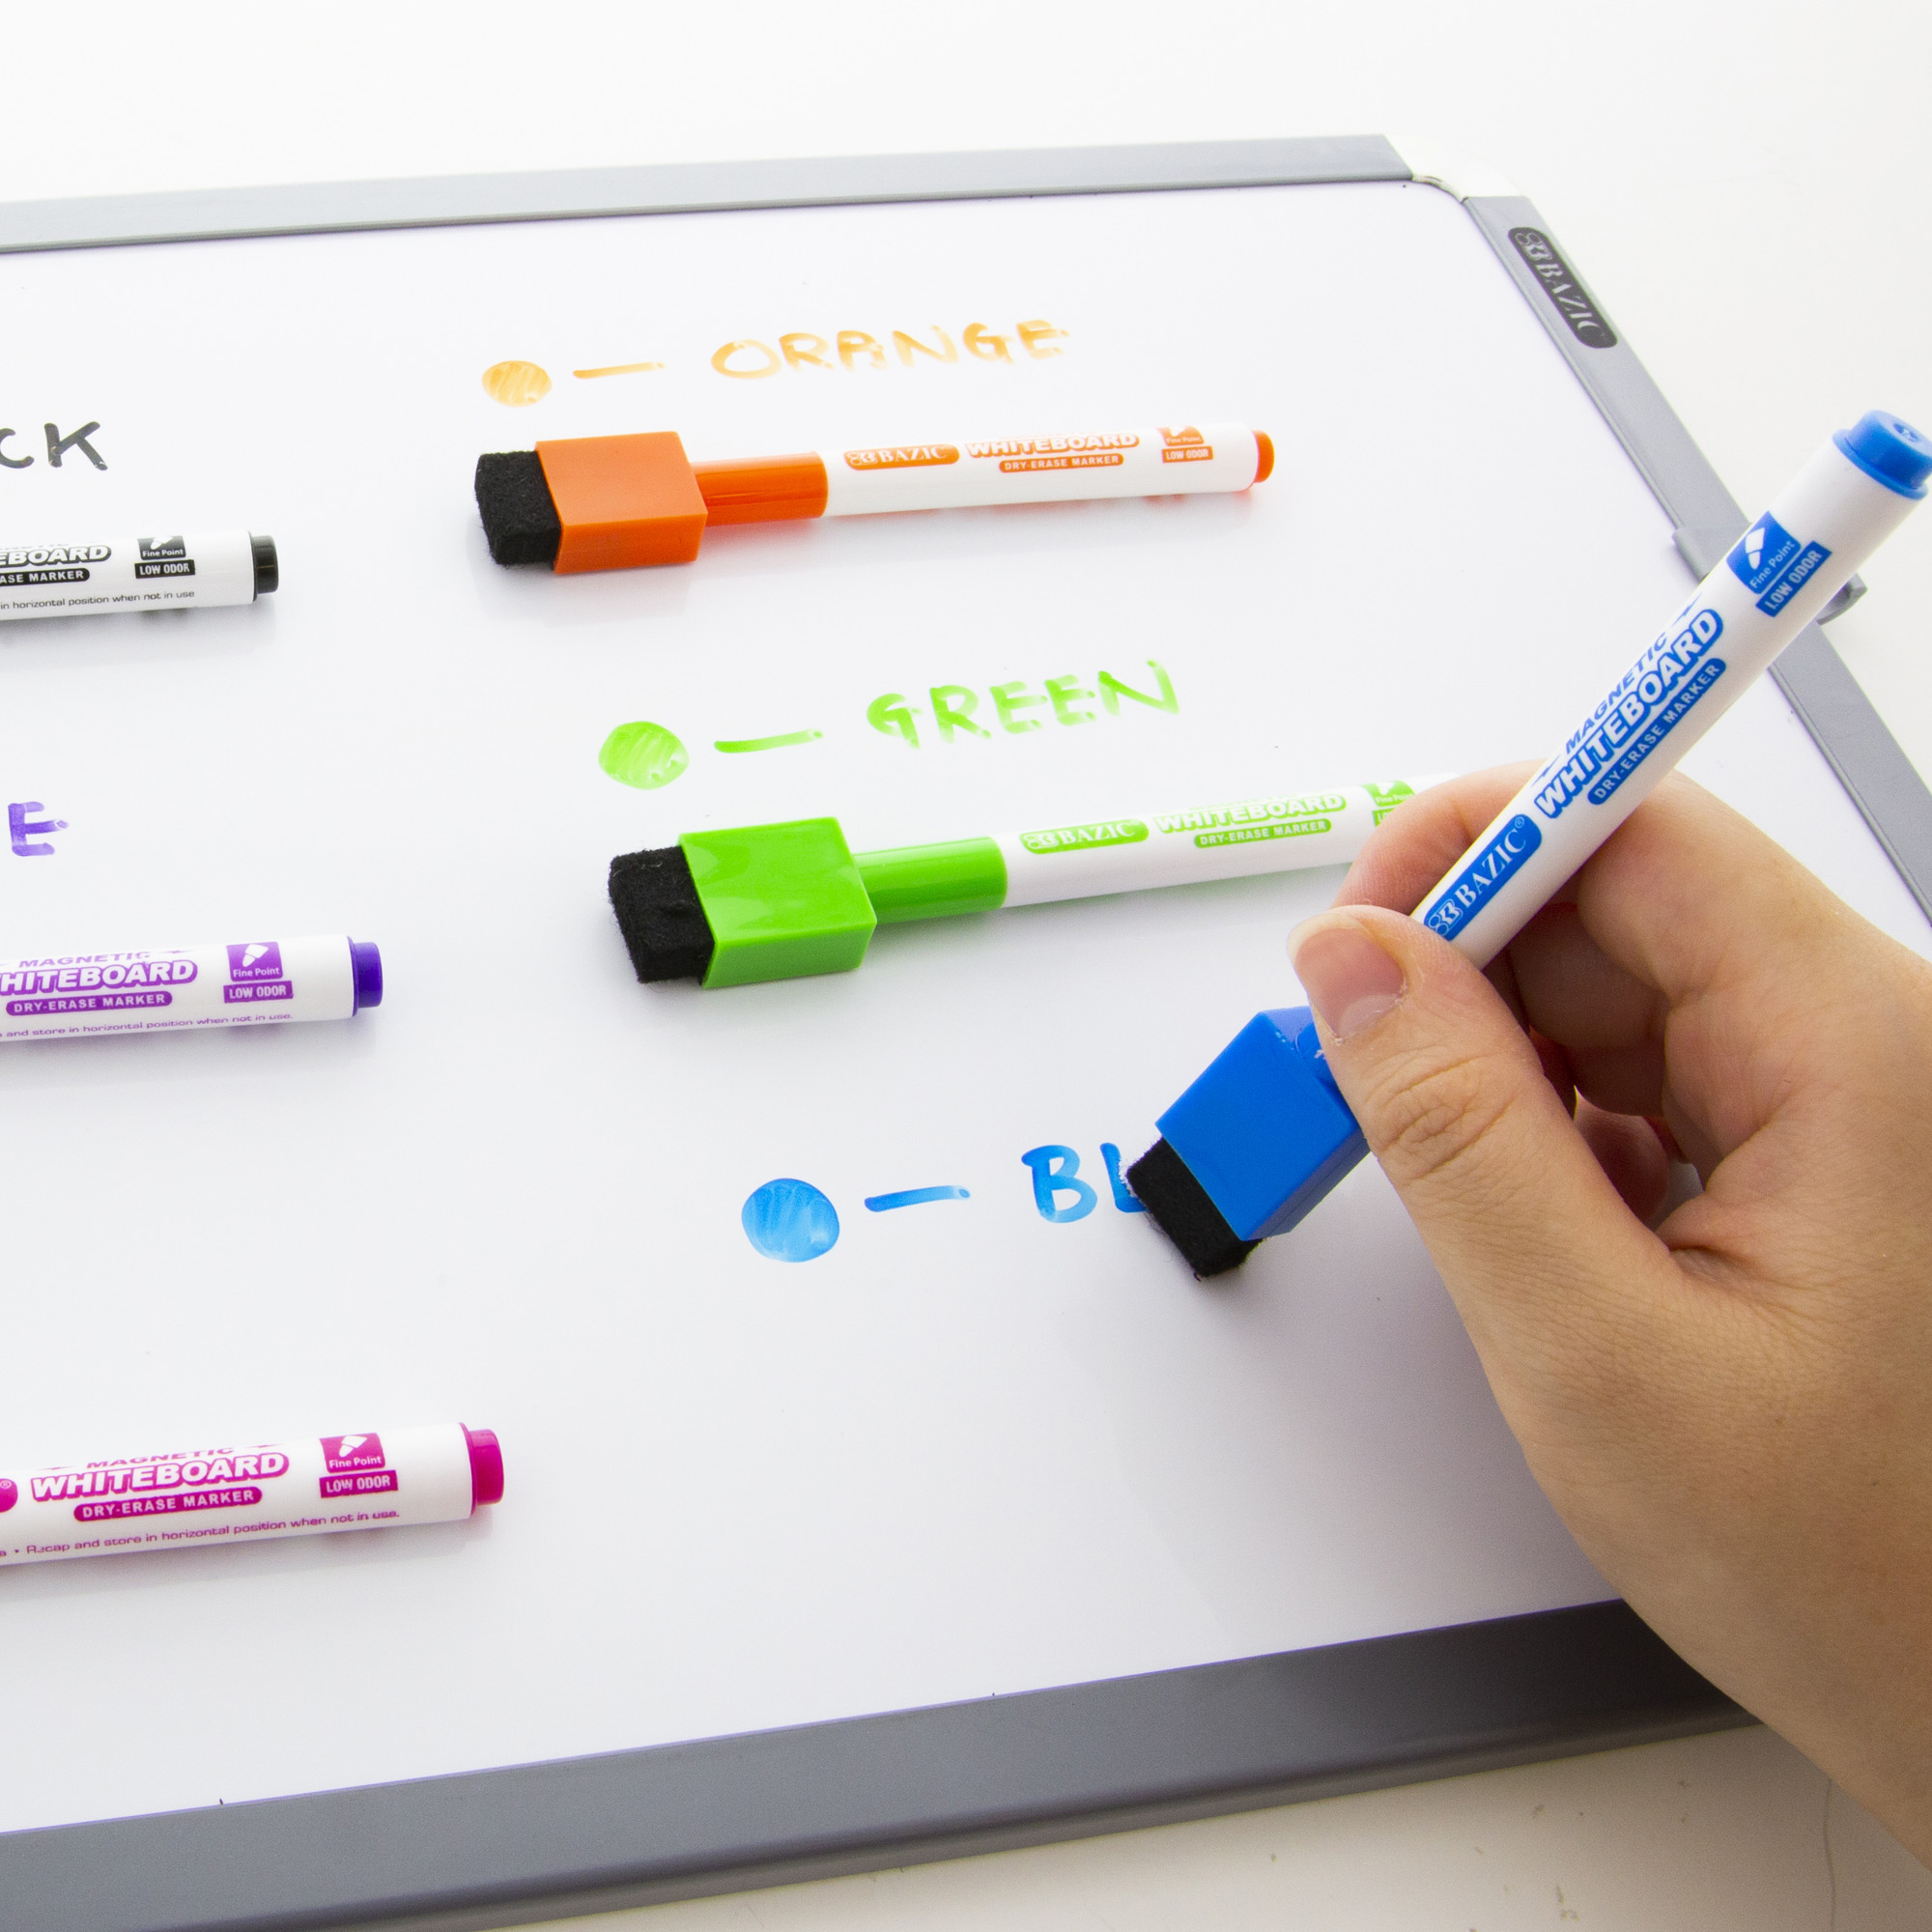 Magnetic (Low-Odor) Whiteboard Markers (Ultra-Fine Tip